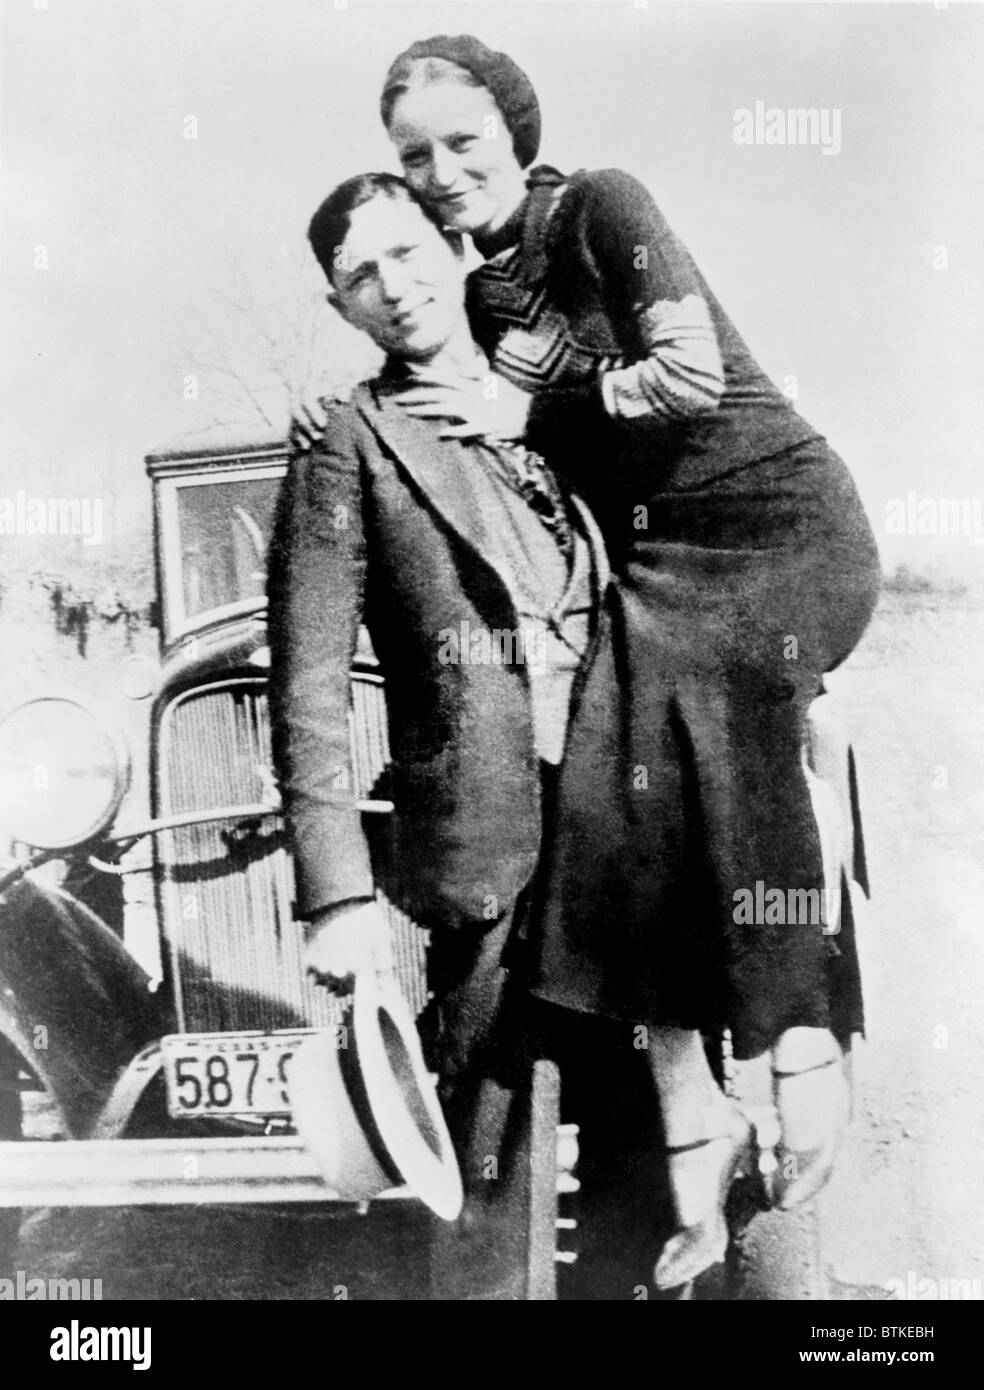 Bonnie and Clyde during their 21 month crime spree of robbery and police murders, in Texas, Oklahoma, New Mexico, and Missouri. Stock Photo